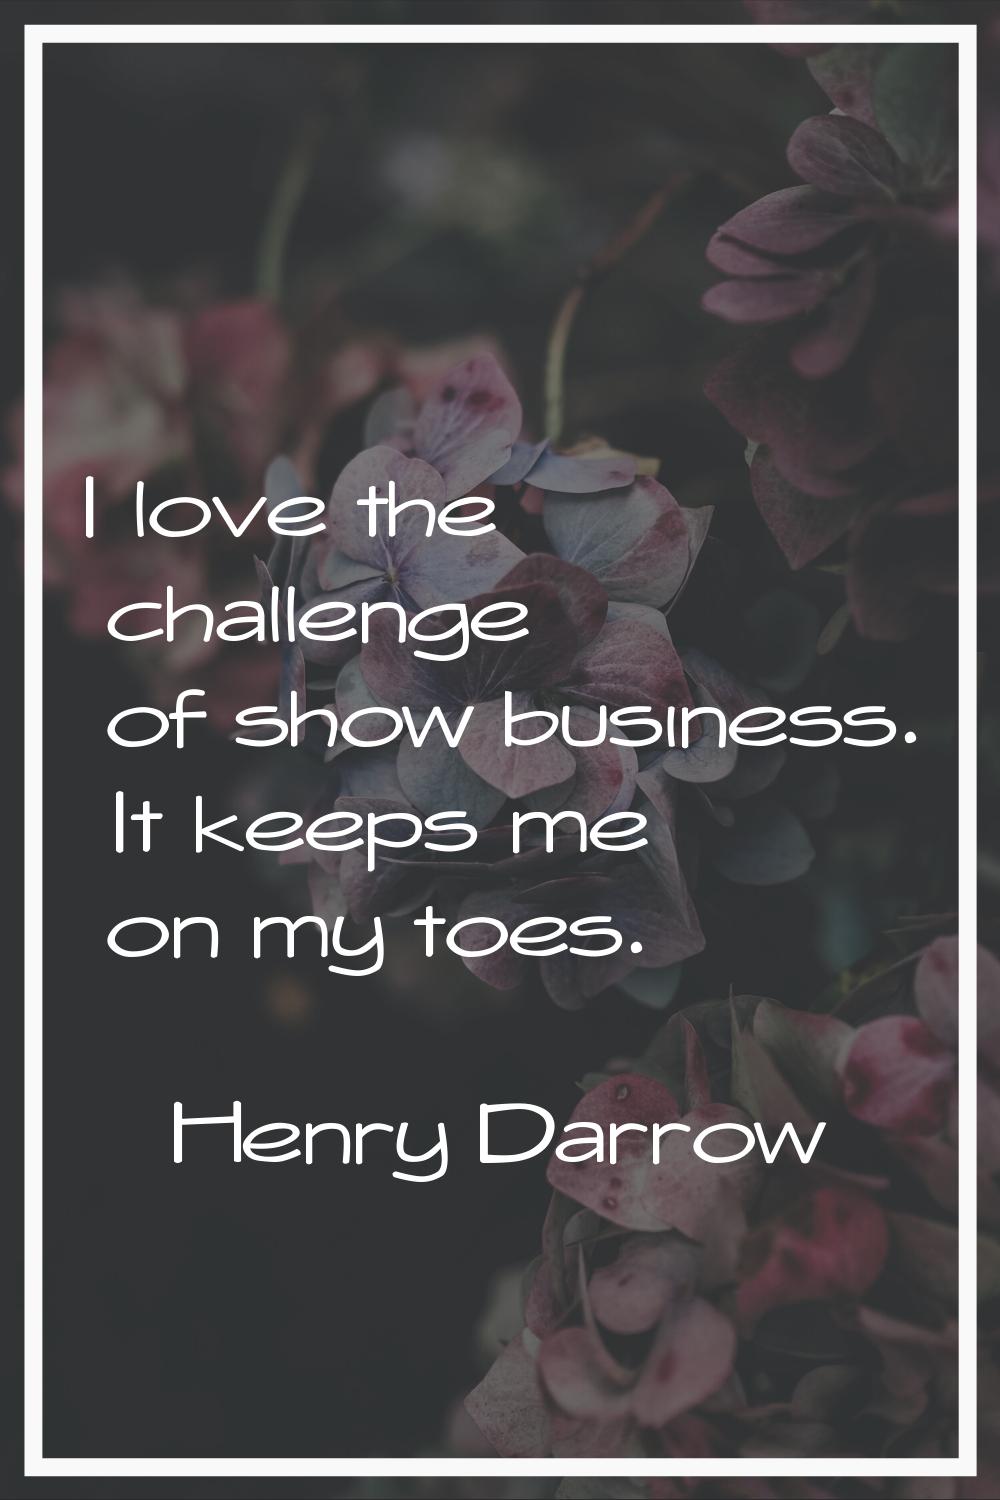 I love the challenge of show business. It keeps me on my toes.